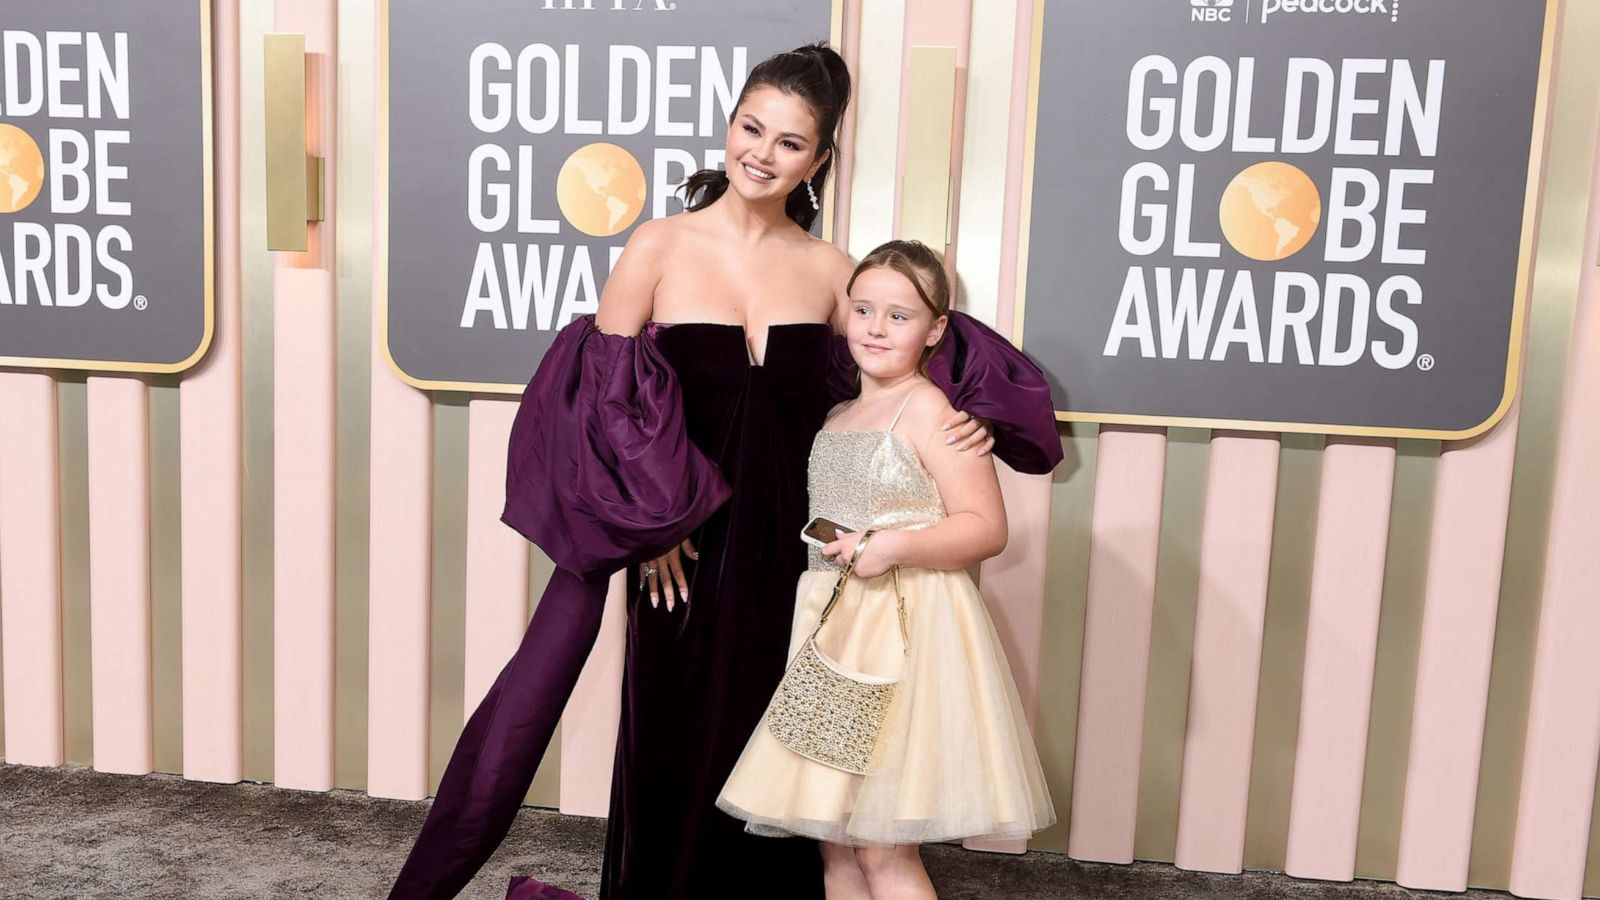 PHOTO: Selena Gomez and Gracie Elliot Teefey attend the 80th Annual Golden Globe Awards at The Beverly Hilton on Jan. 10, 2023 in Beverly Hills, Calif.